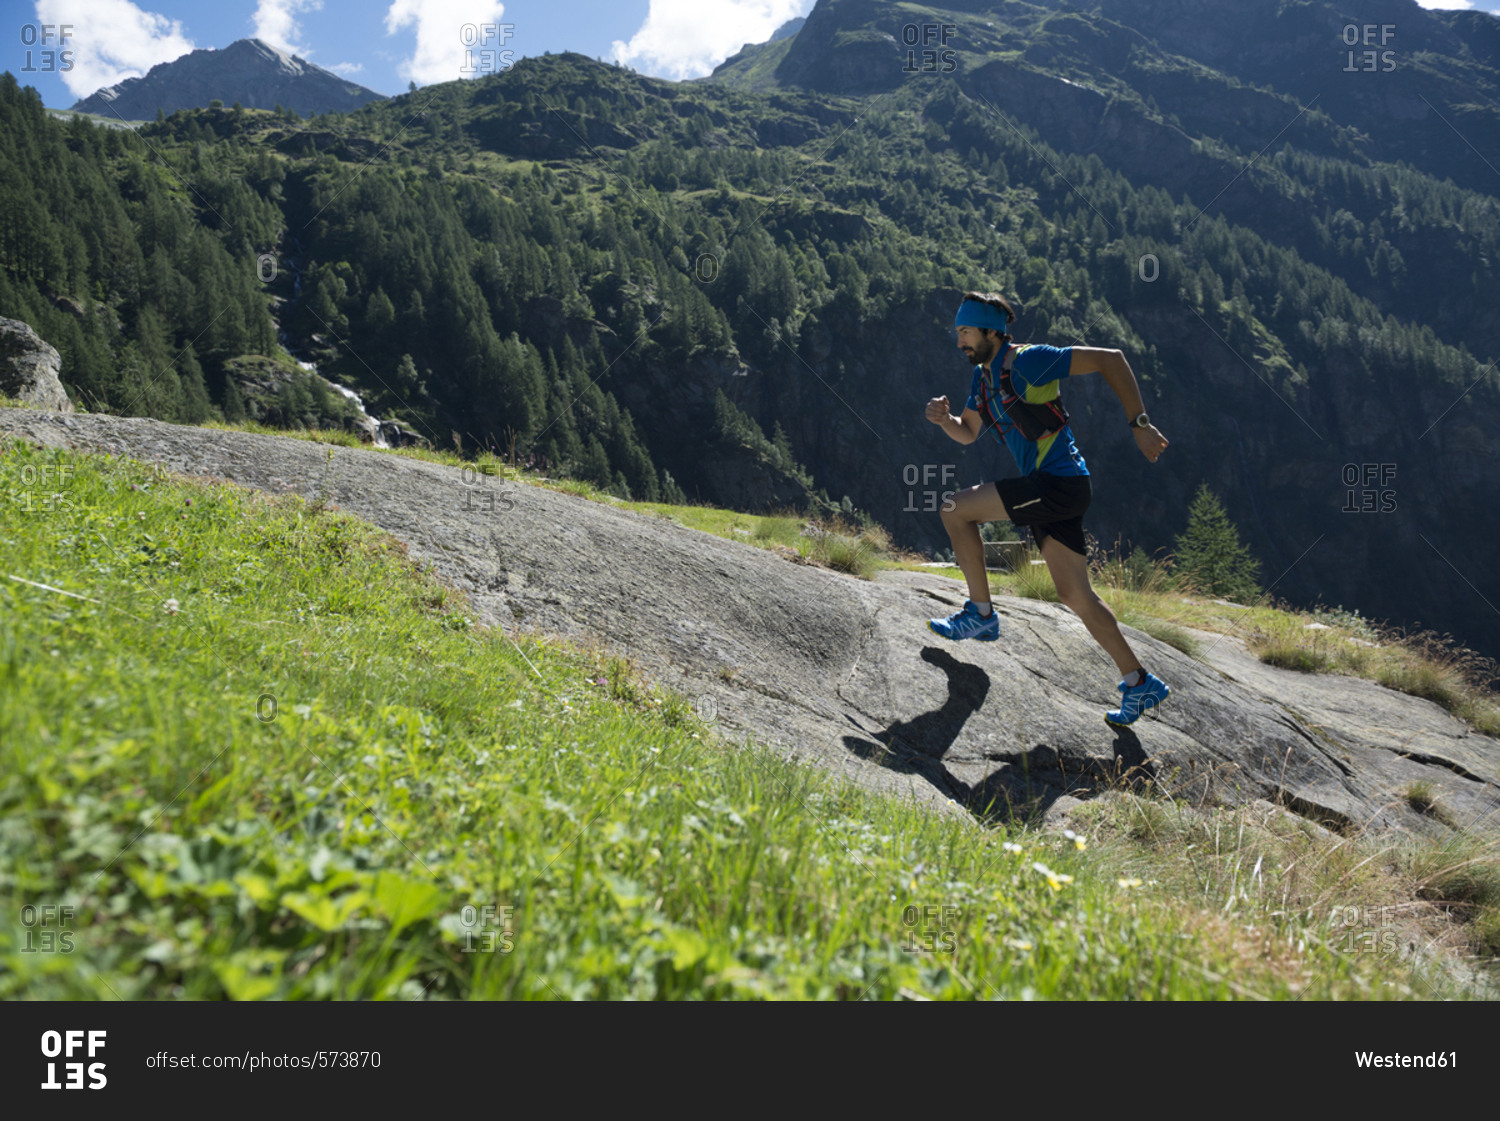 Italy- Alagna- trail runner on the move near Monte Rosa mountain massif